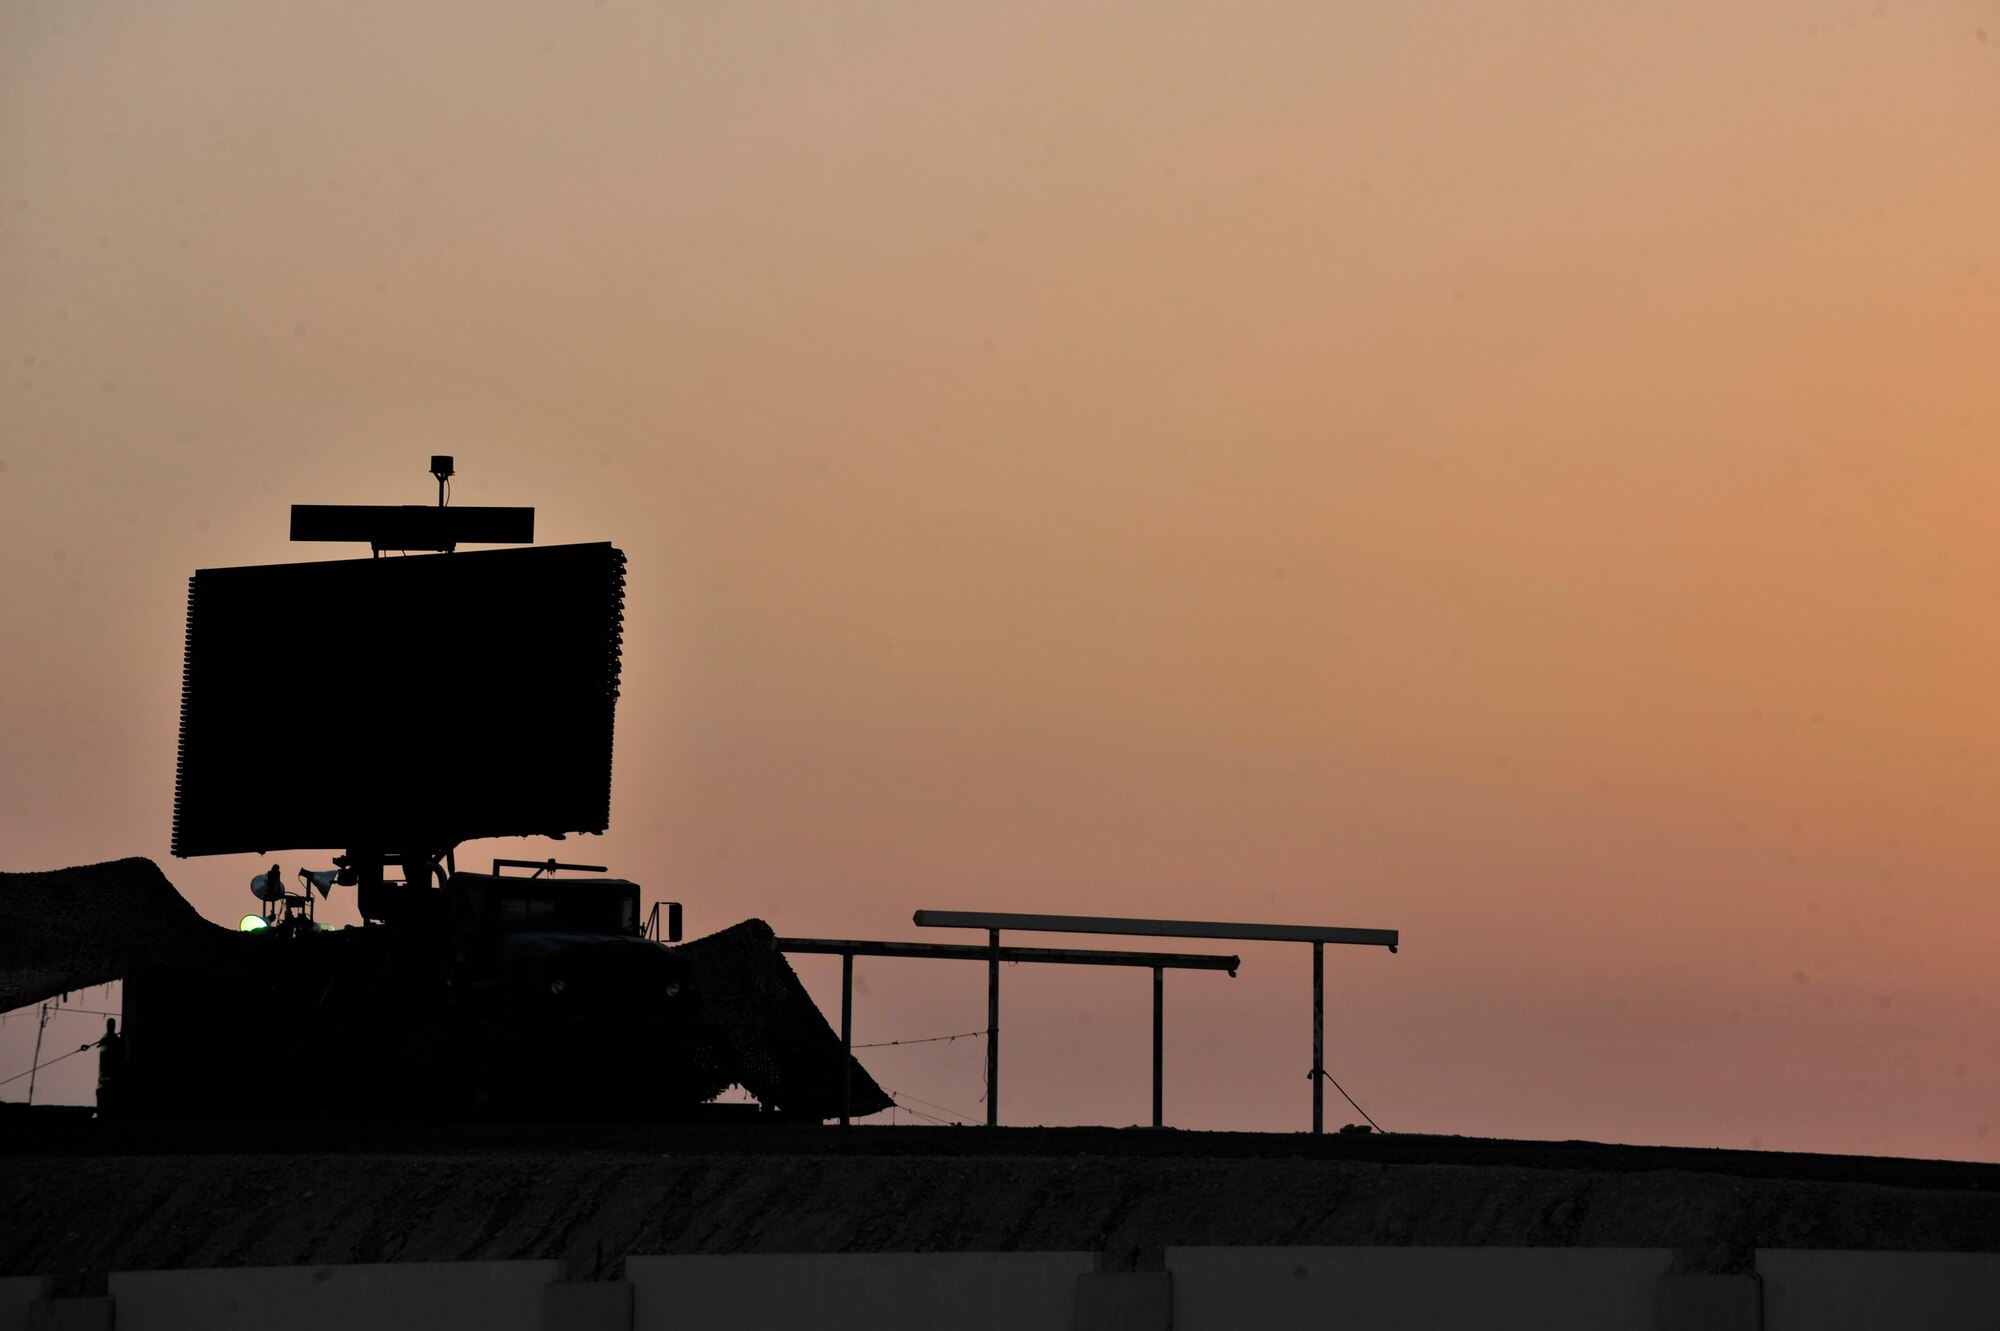 SOUTHWEST ASIA -- The TPS-75 radar system is maintained and operated by members of the 727th Expeditionary Air Control Squadron. The 727th EACS, also known as "Kingpin," is deployed from the 128th Air Control Squadron, Volk Field Combat Readiness Center. (U.S. Air Force photo/Tech. Sgt. Christina M. Styer)(RELEASED)